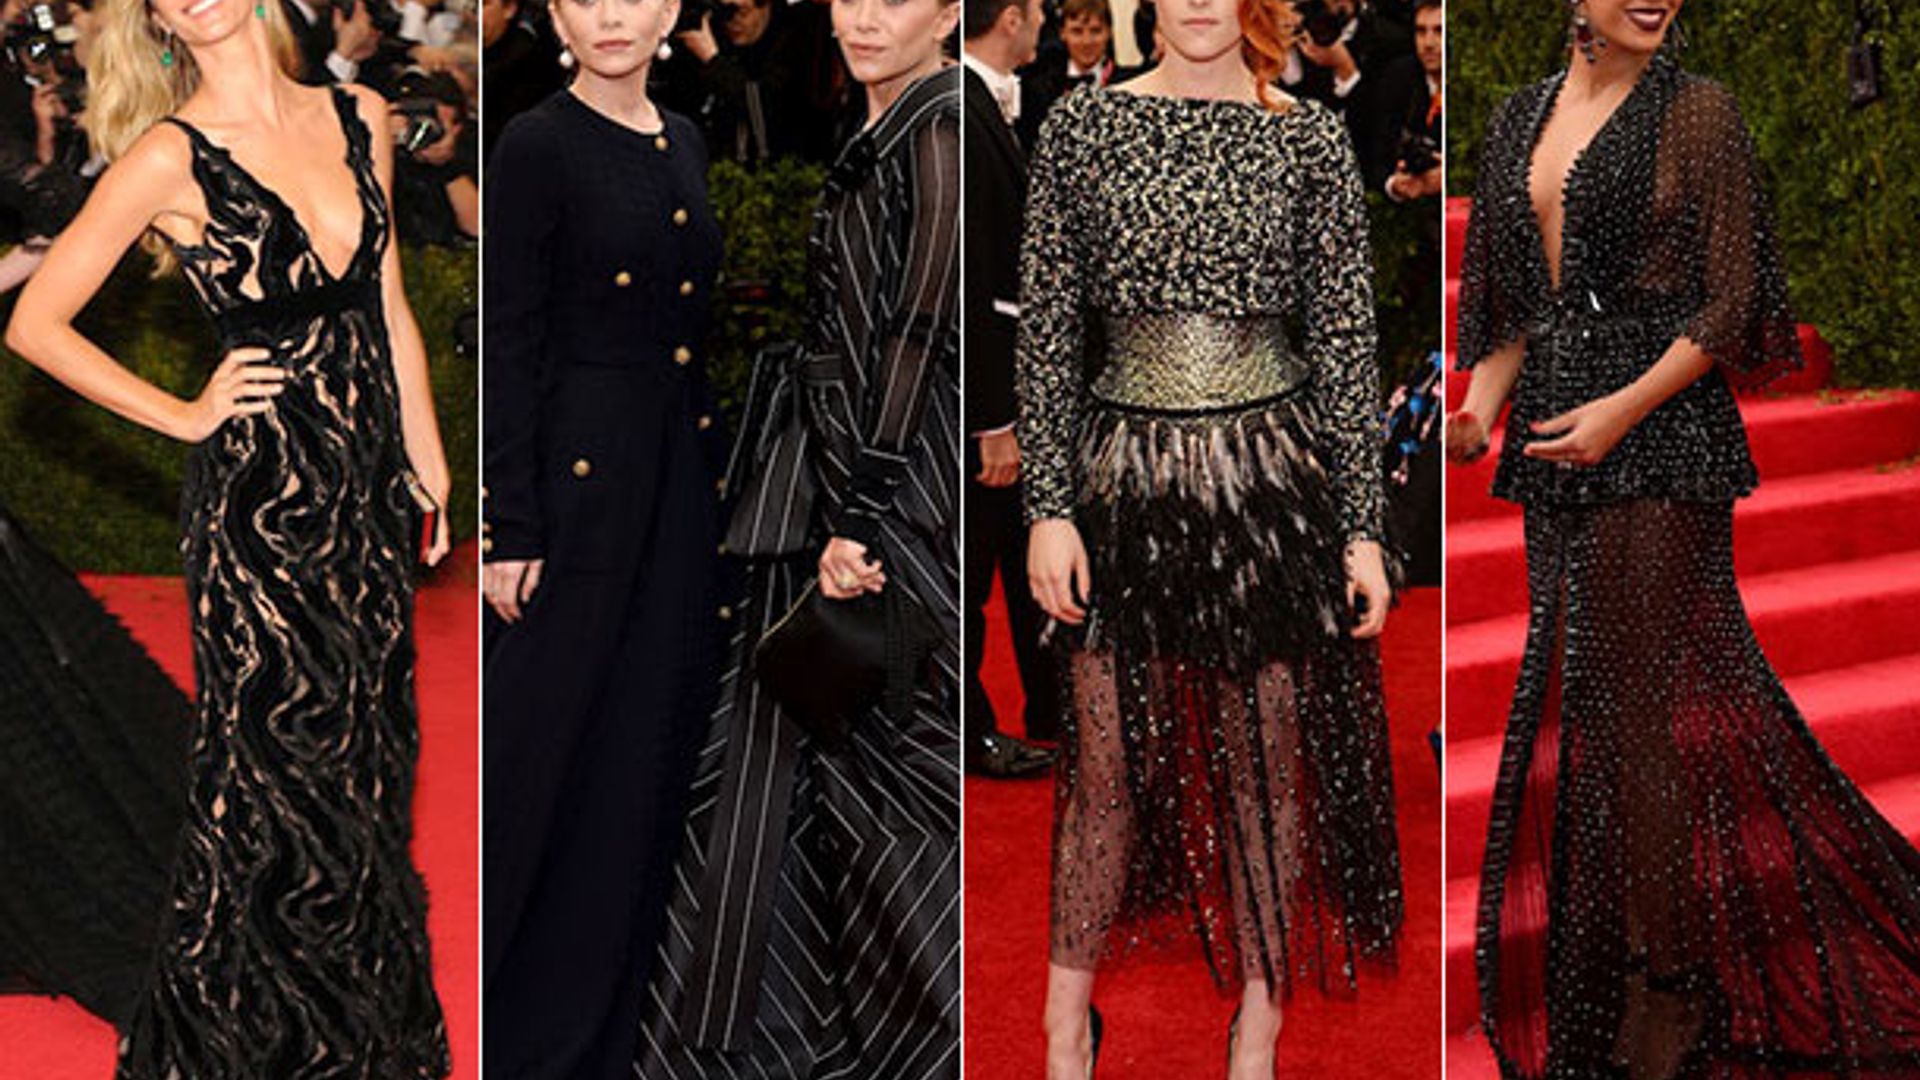 Met Ball 2014: Stars do pale and interesting on fashion's biggest night